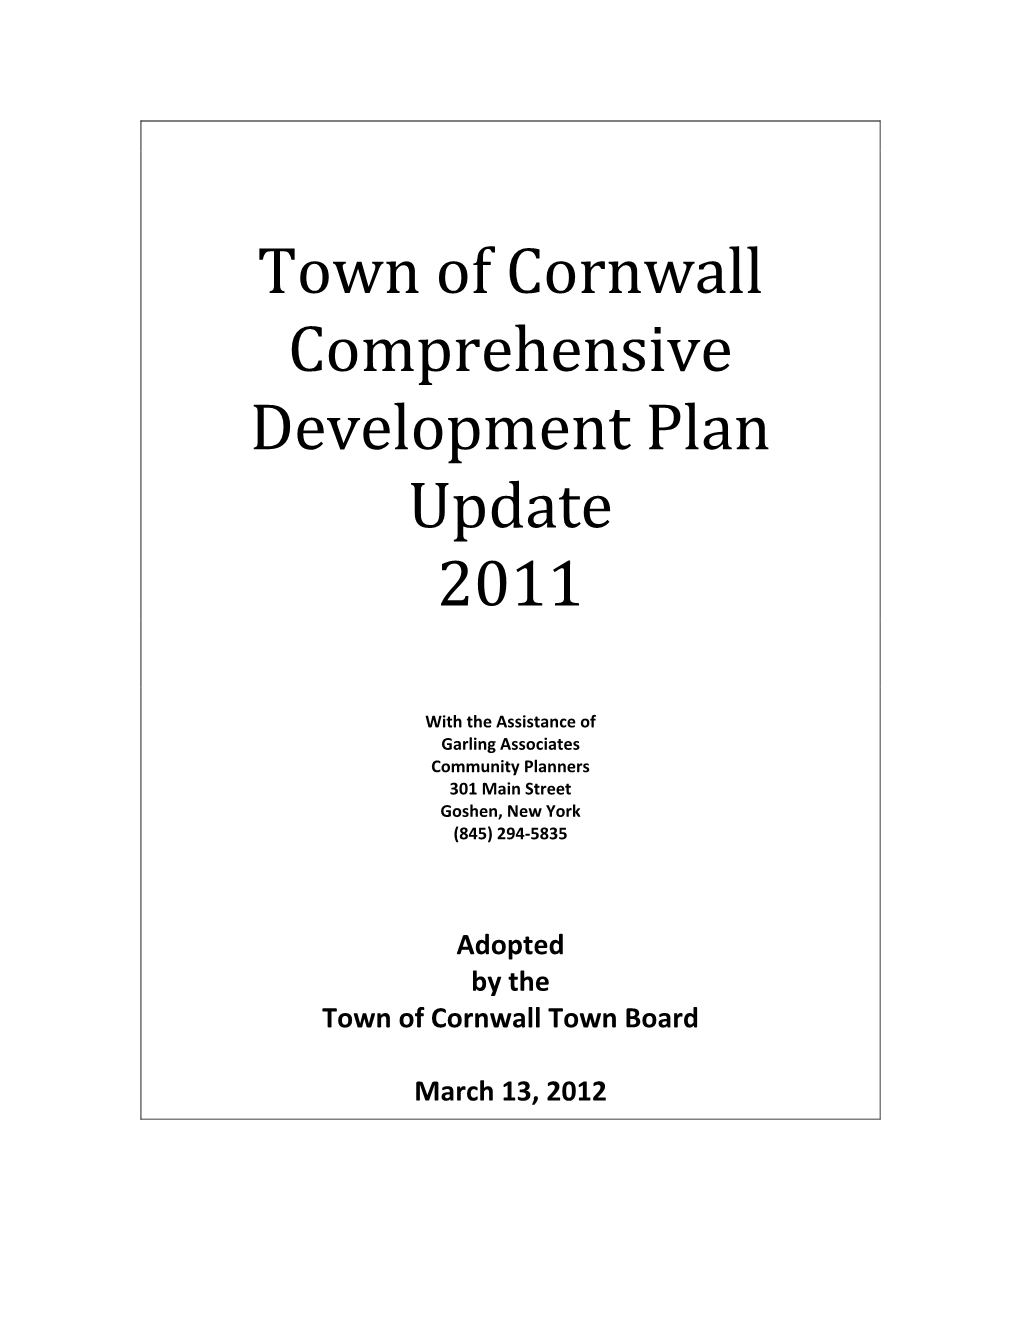 Cornwall Comprehensive Plan Update Adopted March 13, 2012